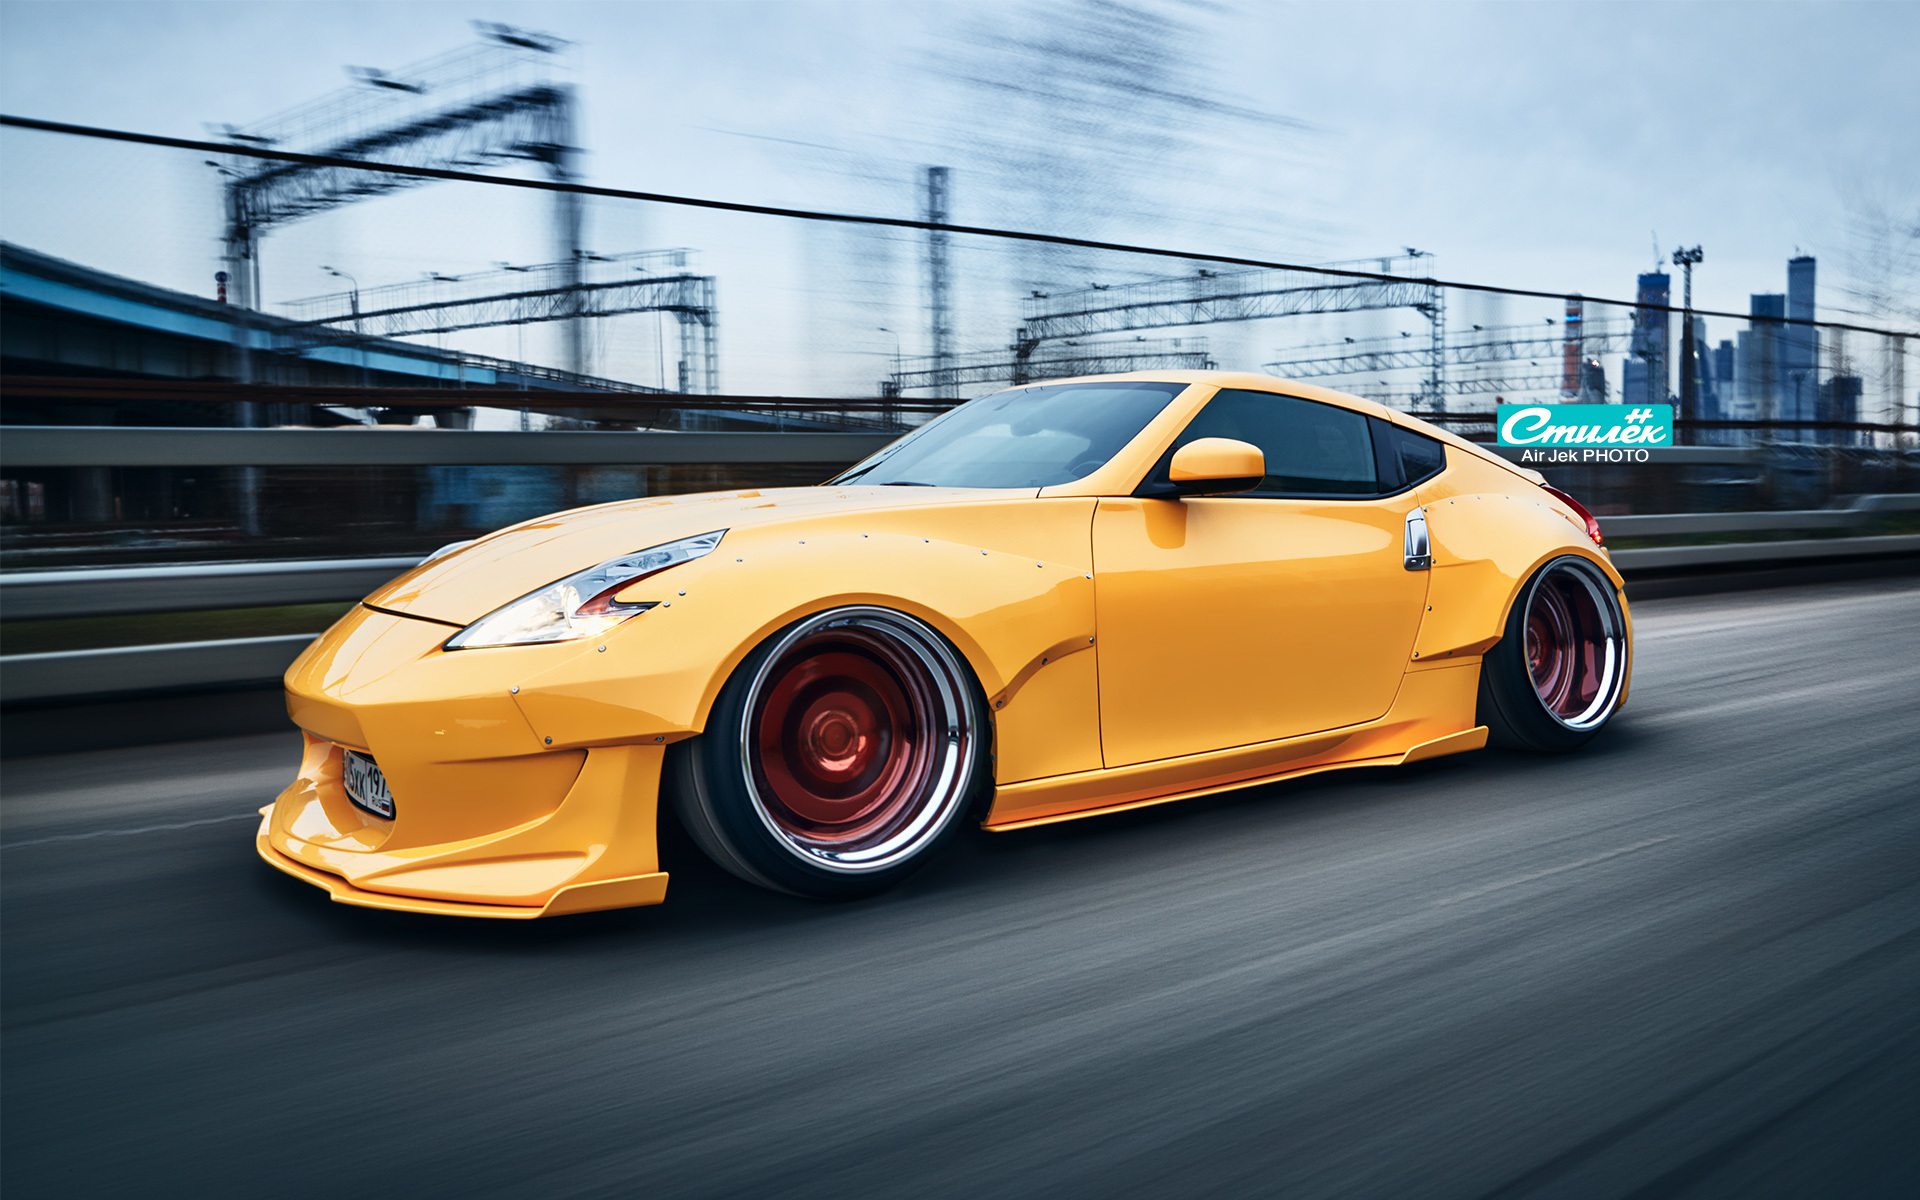 Wallpaper Nissan 370z Tuning Low Stance Moscow City Speed Car